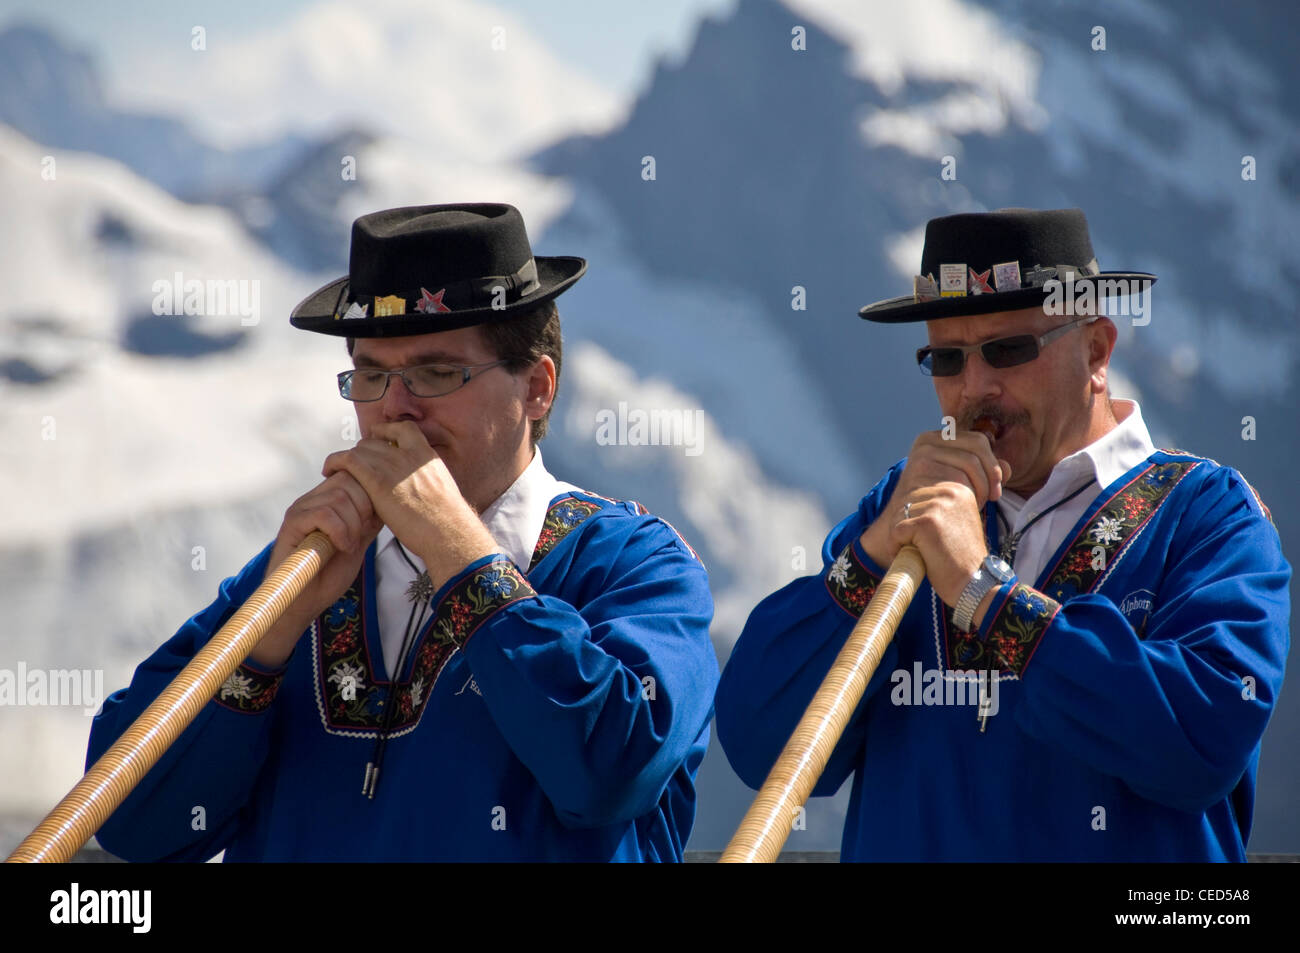 Horizontal close up portrait of two traditionally dressed Swiss men playing the Alpine horn with the Swiss Alps behind them. Stock Photo